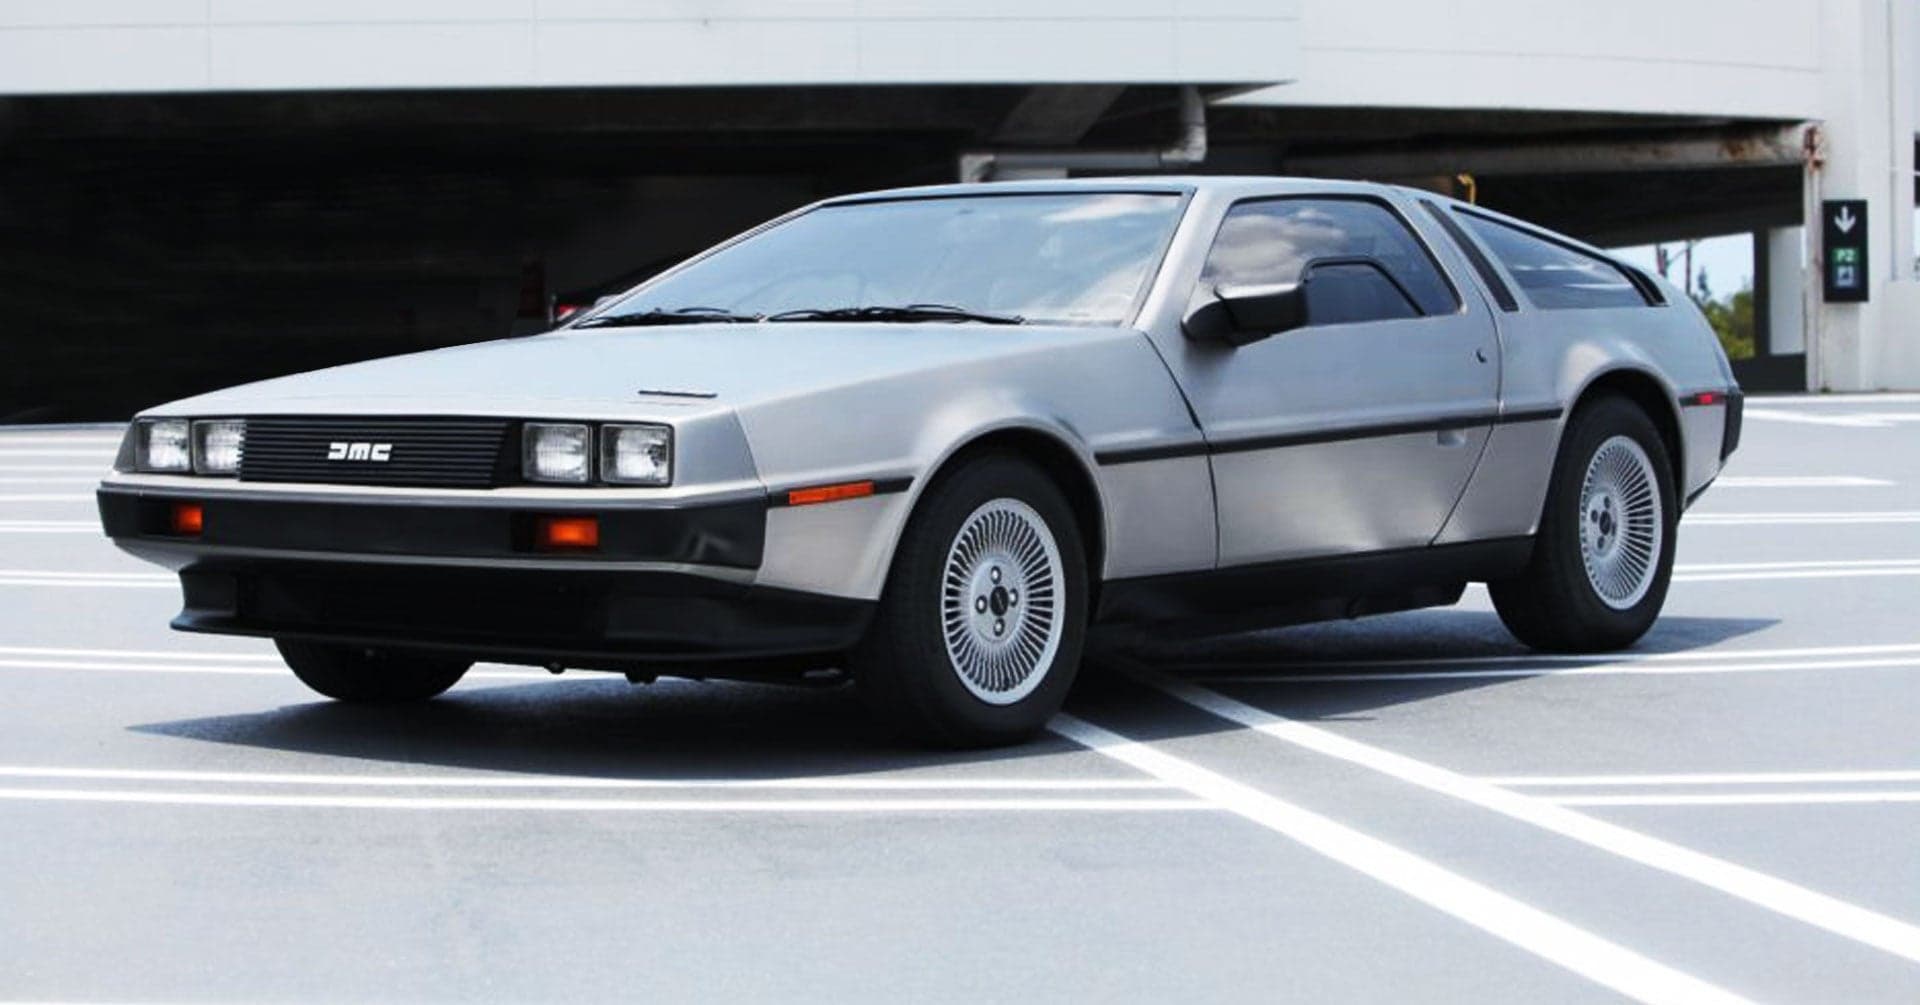 Why I’m Selling My DeLorean